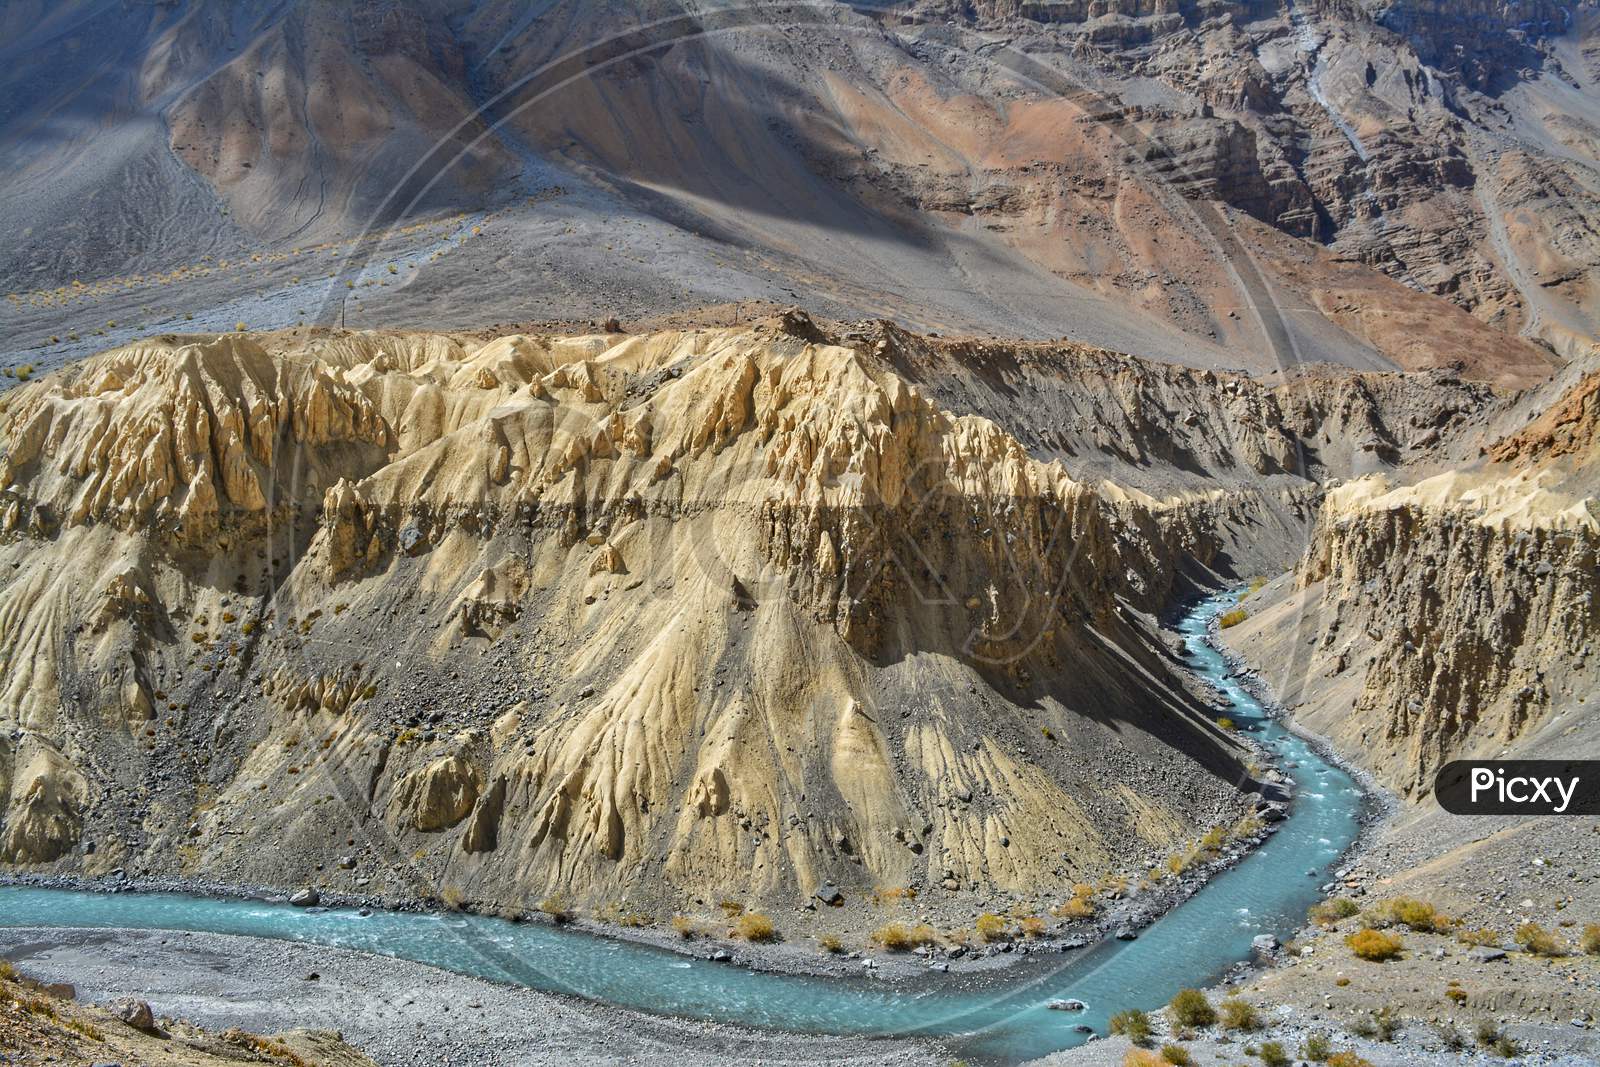 Spiti river and unique rock formations in Spiti Valley, Himachal Pradesh